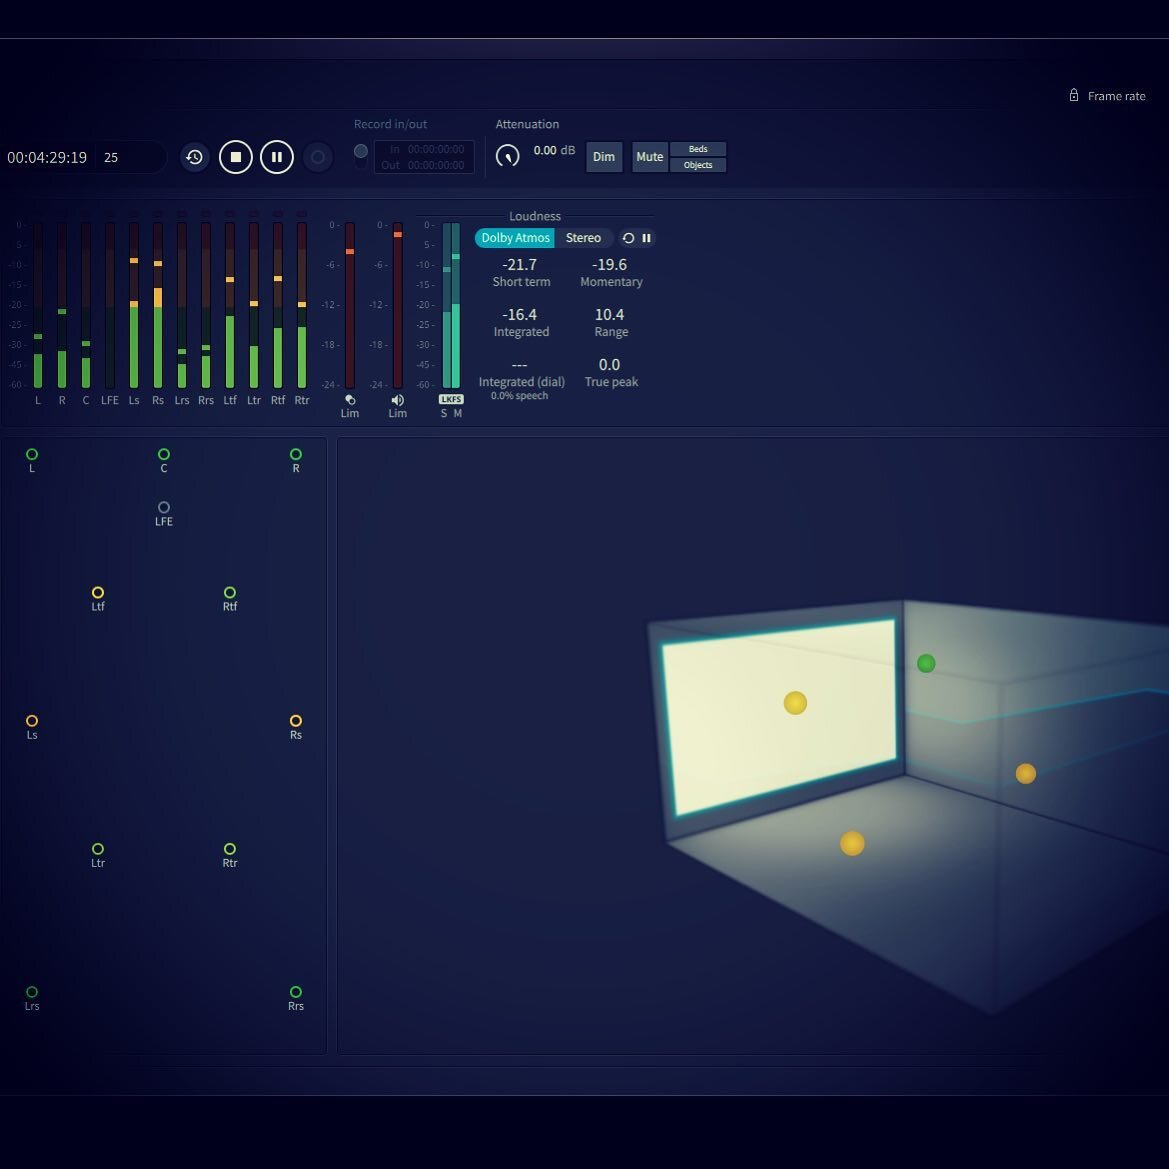 Having fun setting up new templates in #protools with the #dolbyatmosrenderer #soundediting  #postproductionsound #audiopostproduction #audiopost #sounddesign #sounddesigner